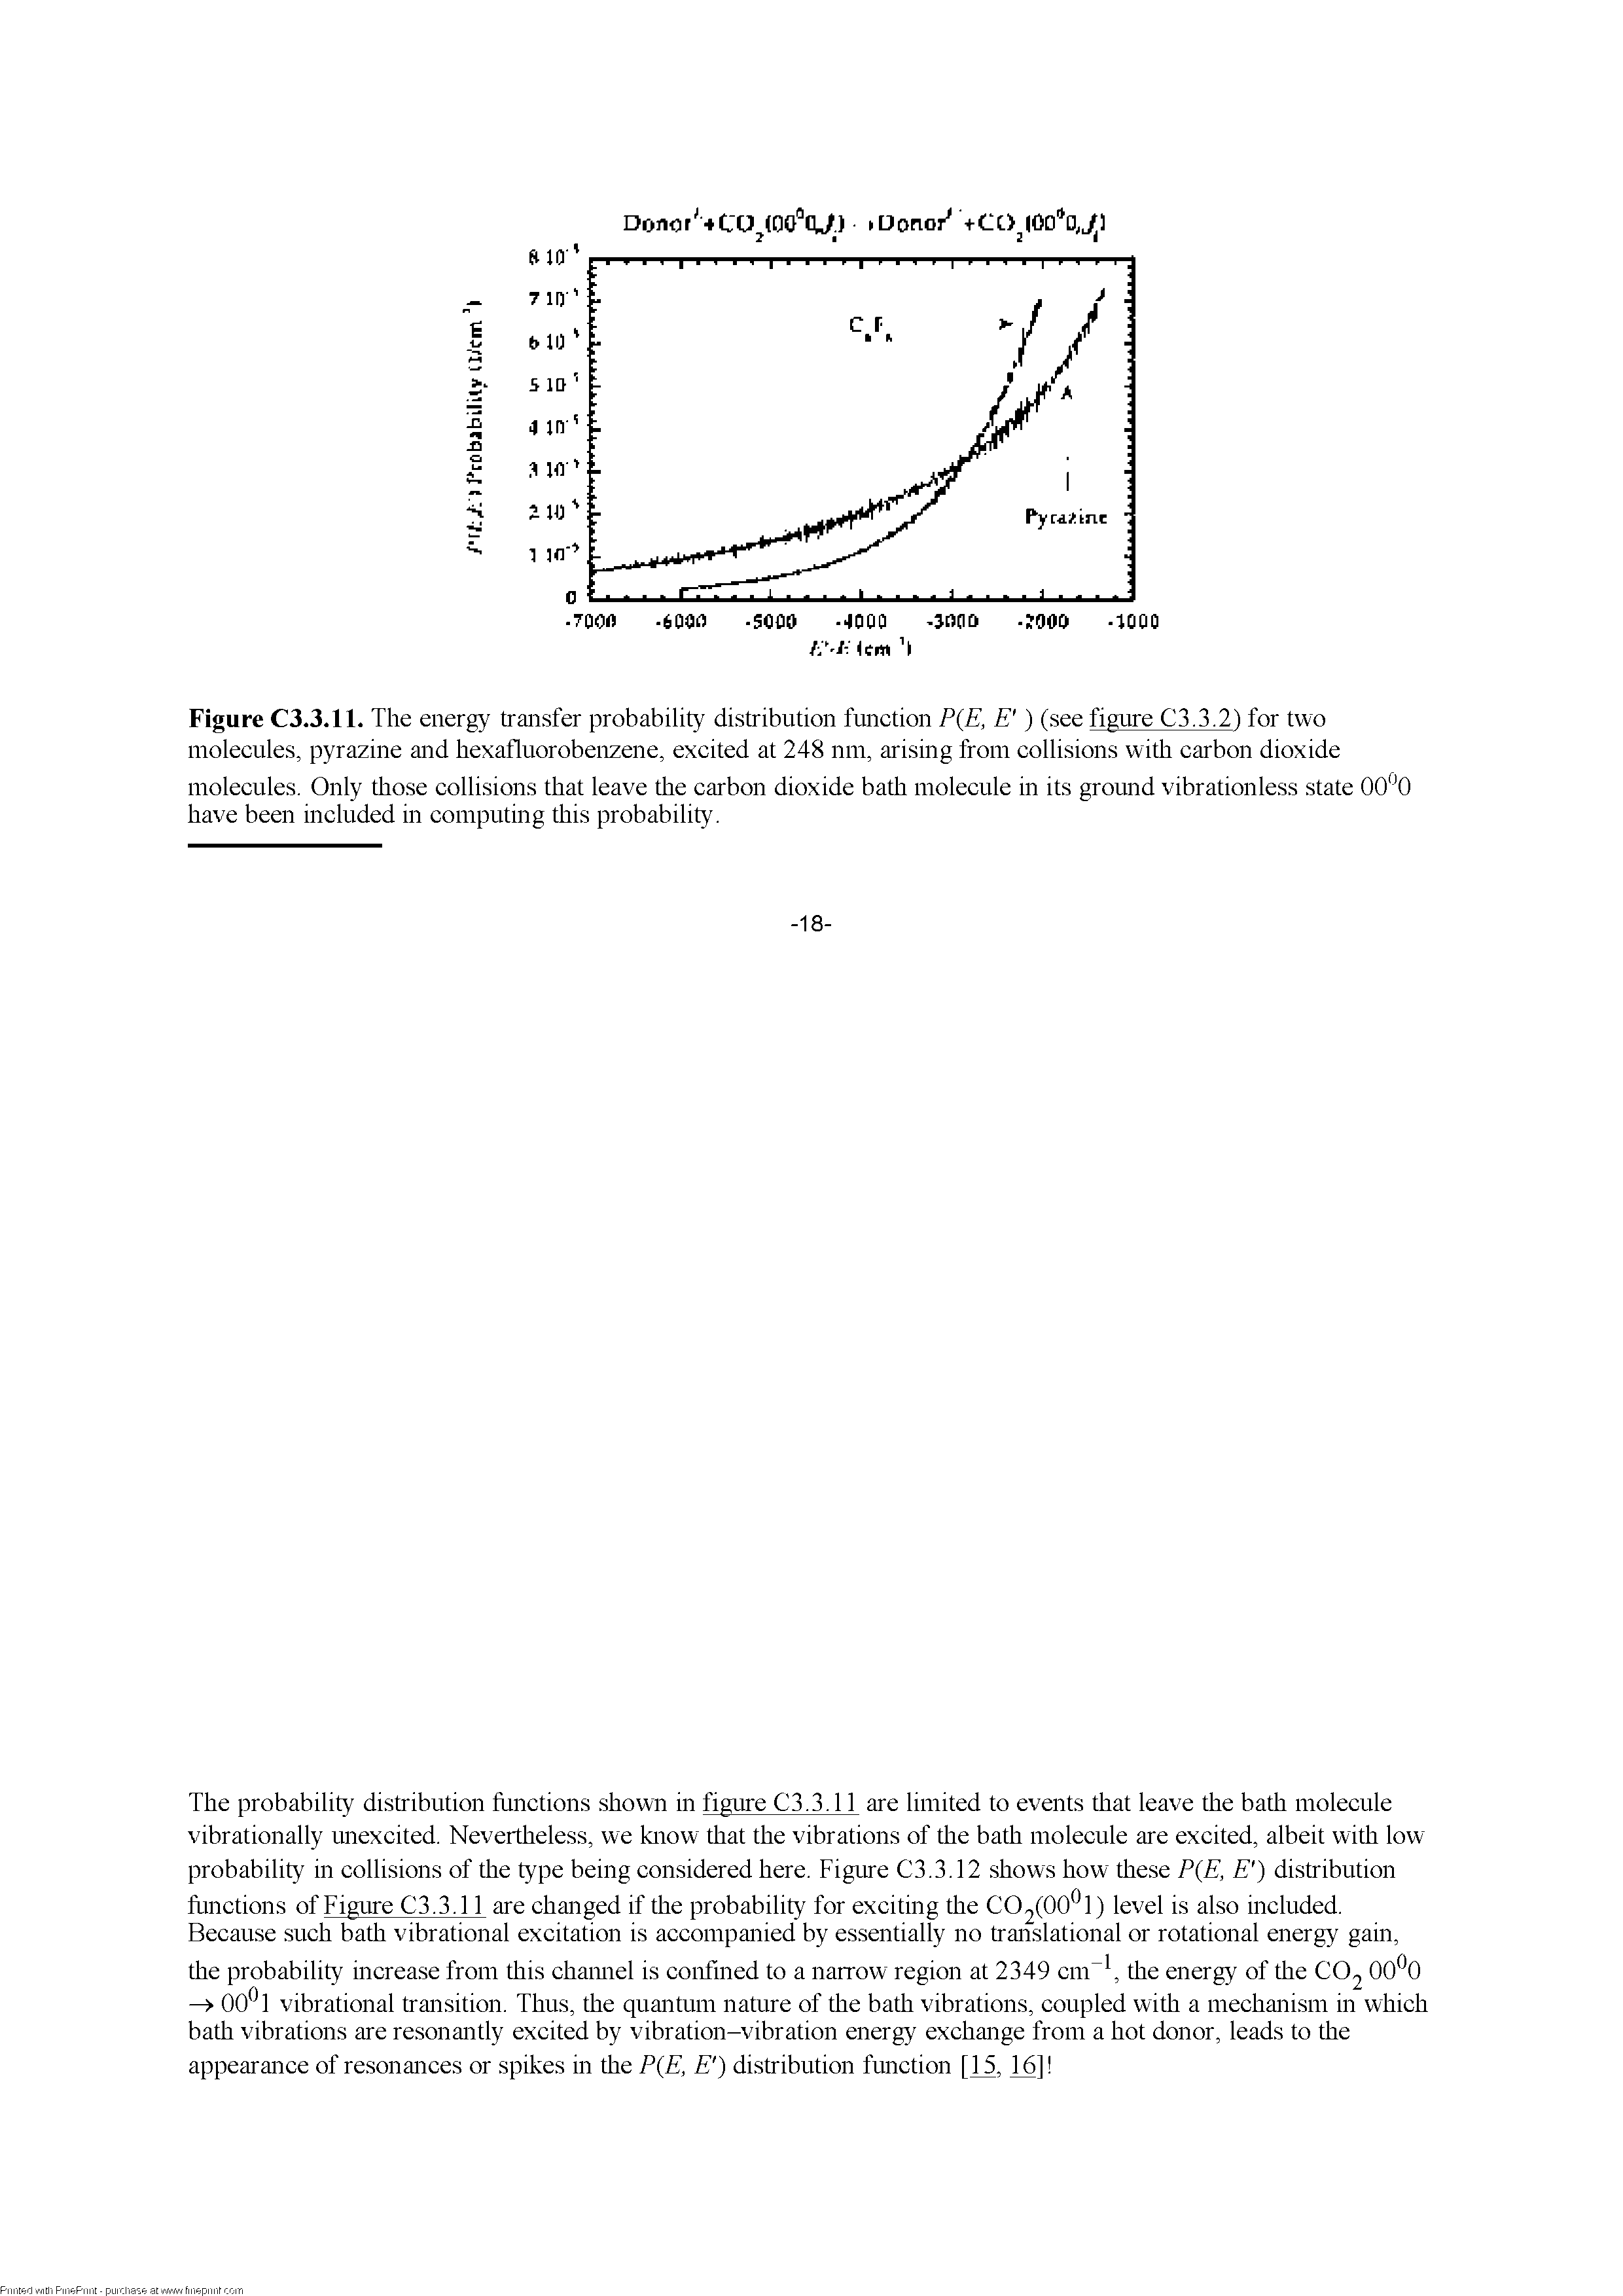 Figure C3.3.11. The energy transfer probability distribution function P(E, E ) (see figure C3.3.2) for two molecules, pyrazine and hexafluorobenzene, excited at 248 nm, arising from collisions with carbon dioxide...